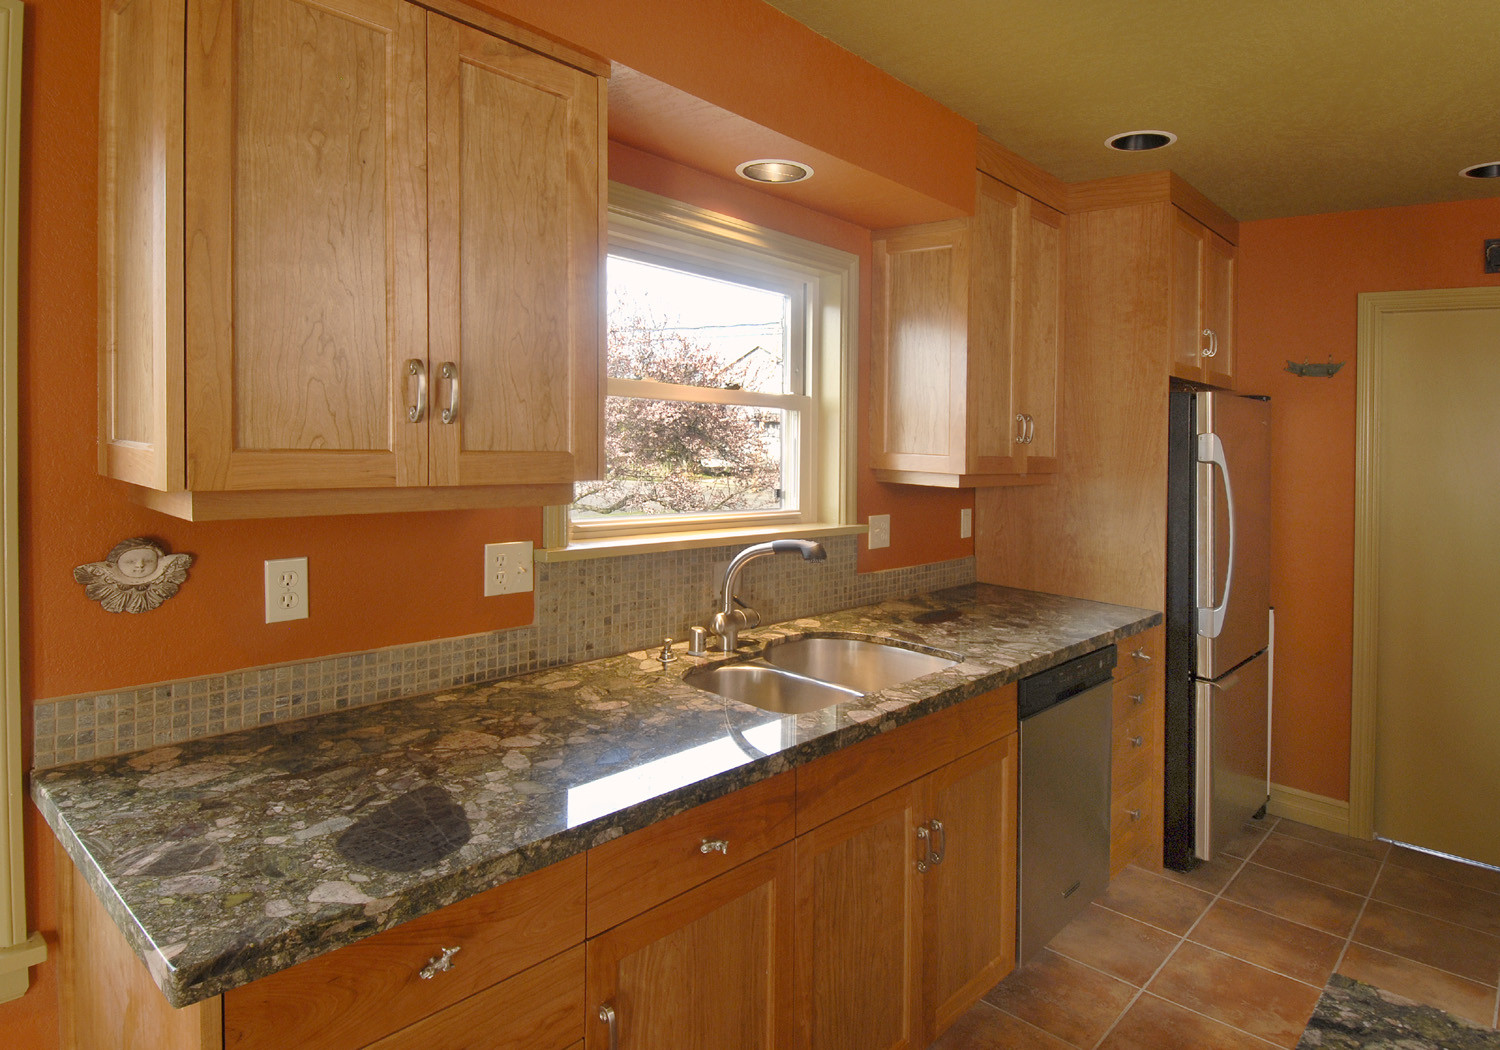 Kitchen Cabinet With Counter
 Granite countertops